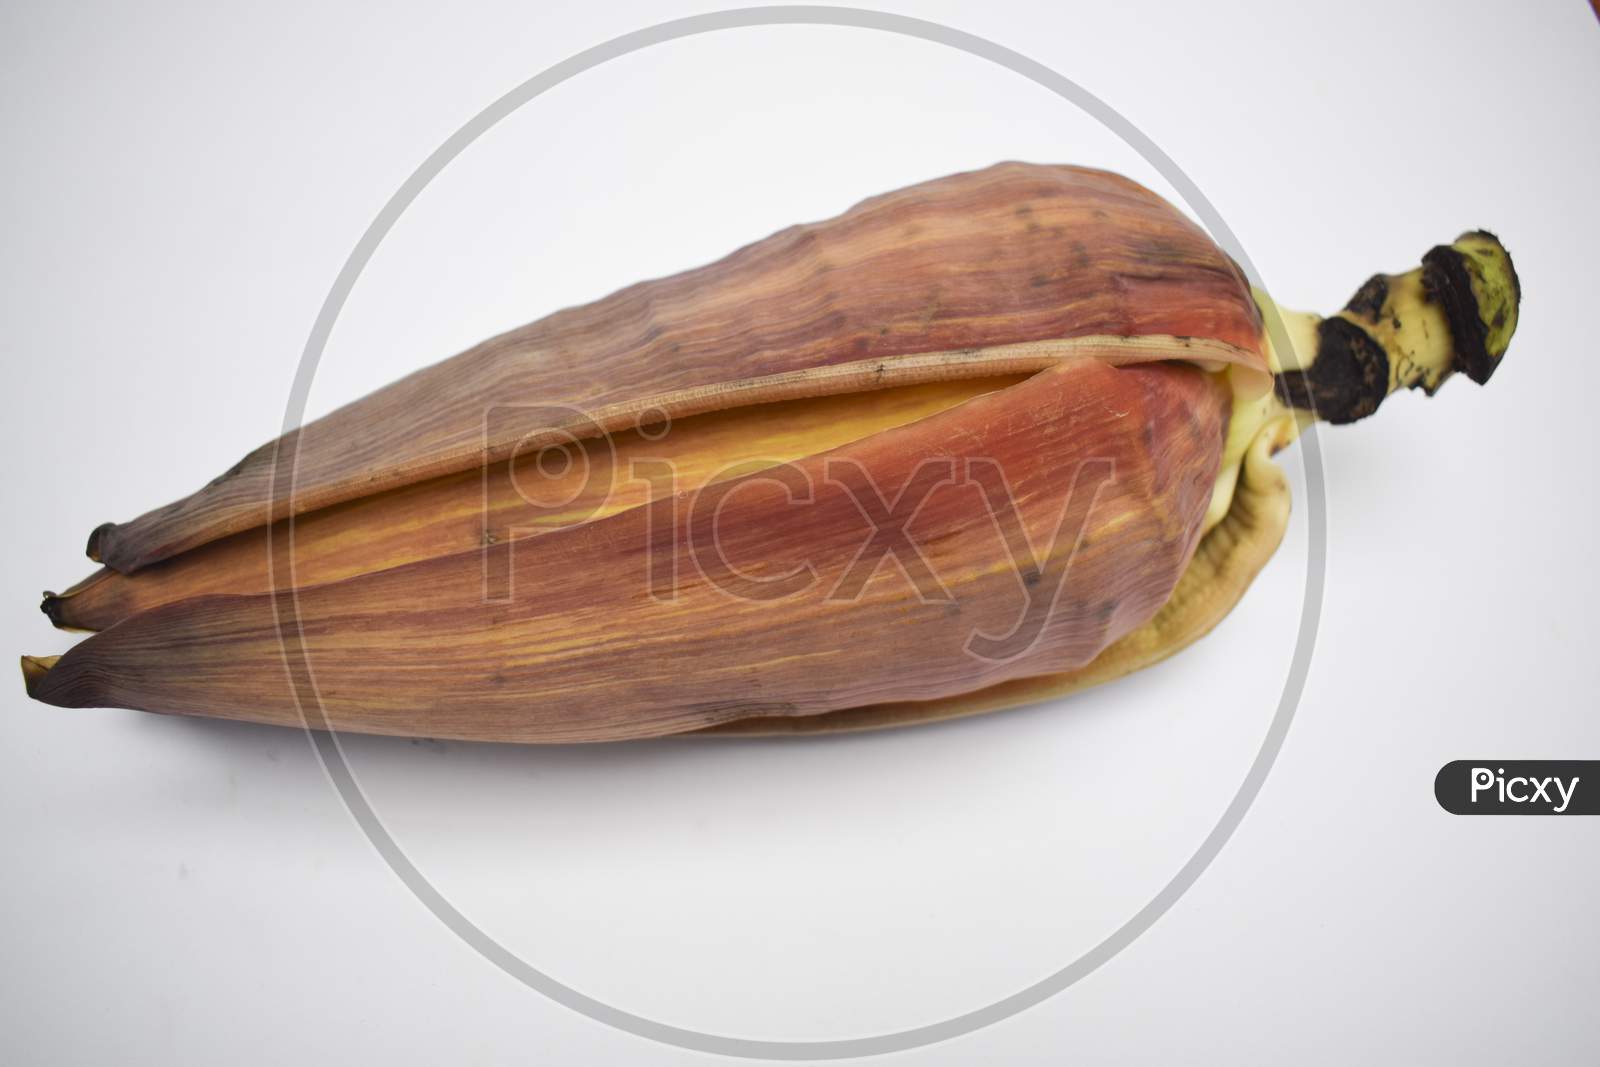 Single Banana Flower Isolated On White Background From Asia